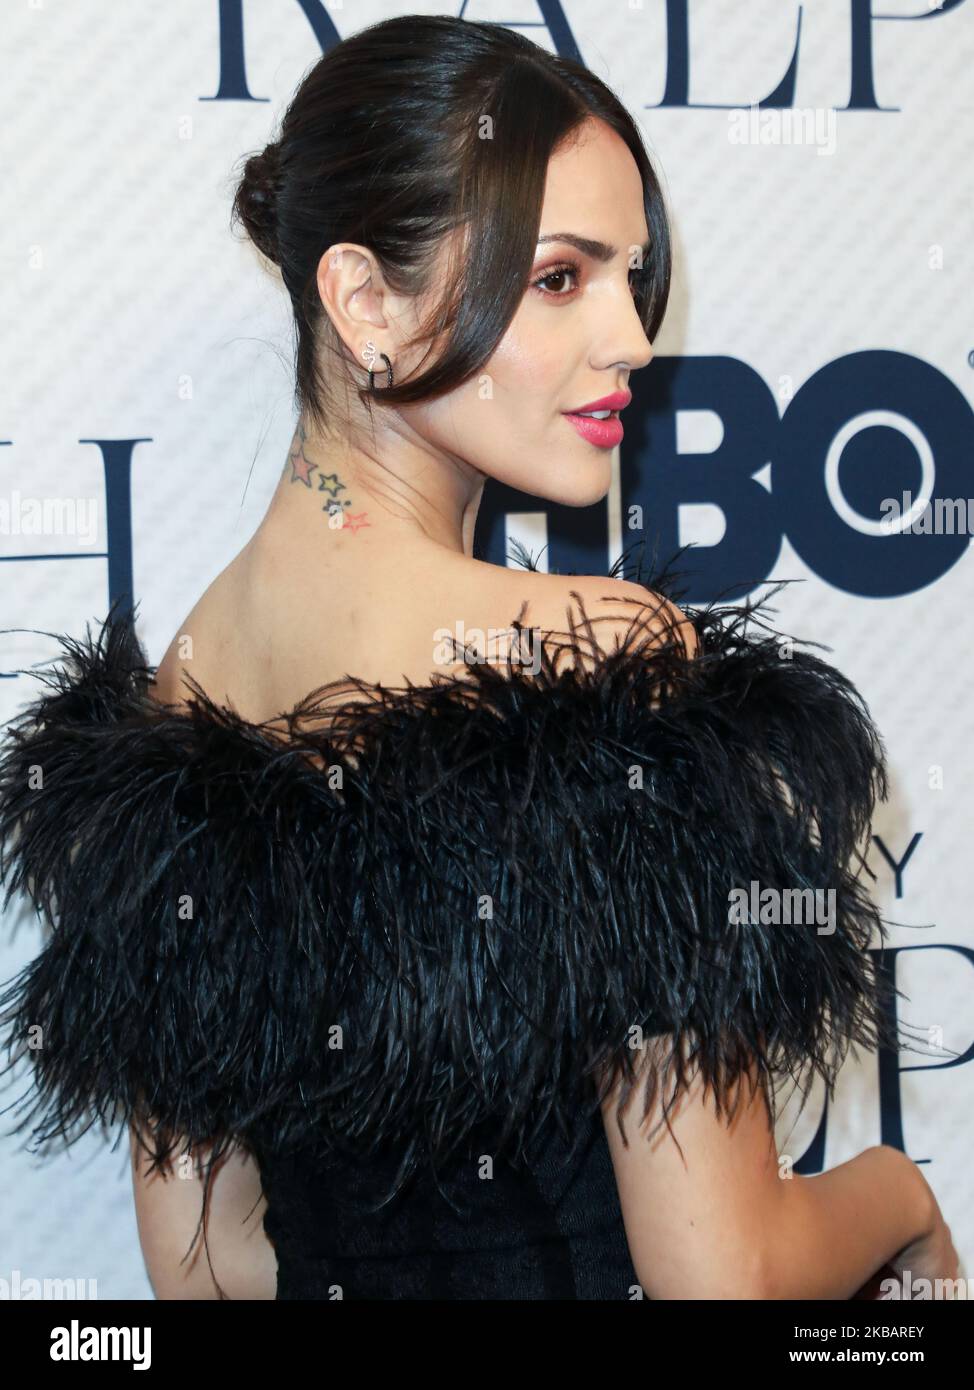 BEVERLY HILLS, LOS ANGELES, CALIFORNIA, USA - NOVEMBER 11: Actress Eiza Gonzalez wearing Ralph Lauren arrives at the Los Angeles Premiere Of HBO Documentary Films' 'Very Ralph' held at The Paley Center for Media on November 11, 2019 in Beverly Hills, Los Angeles, California, United States. (Photo by Image Press Agency/NurPhoto) Stock Photo